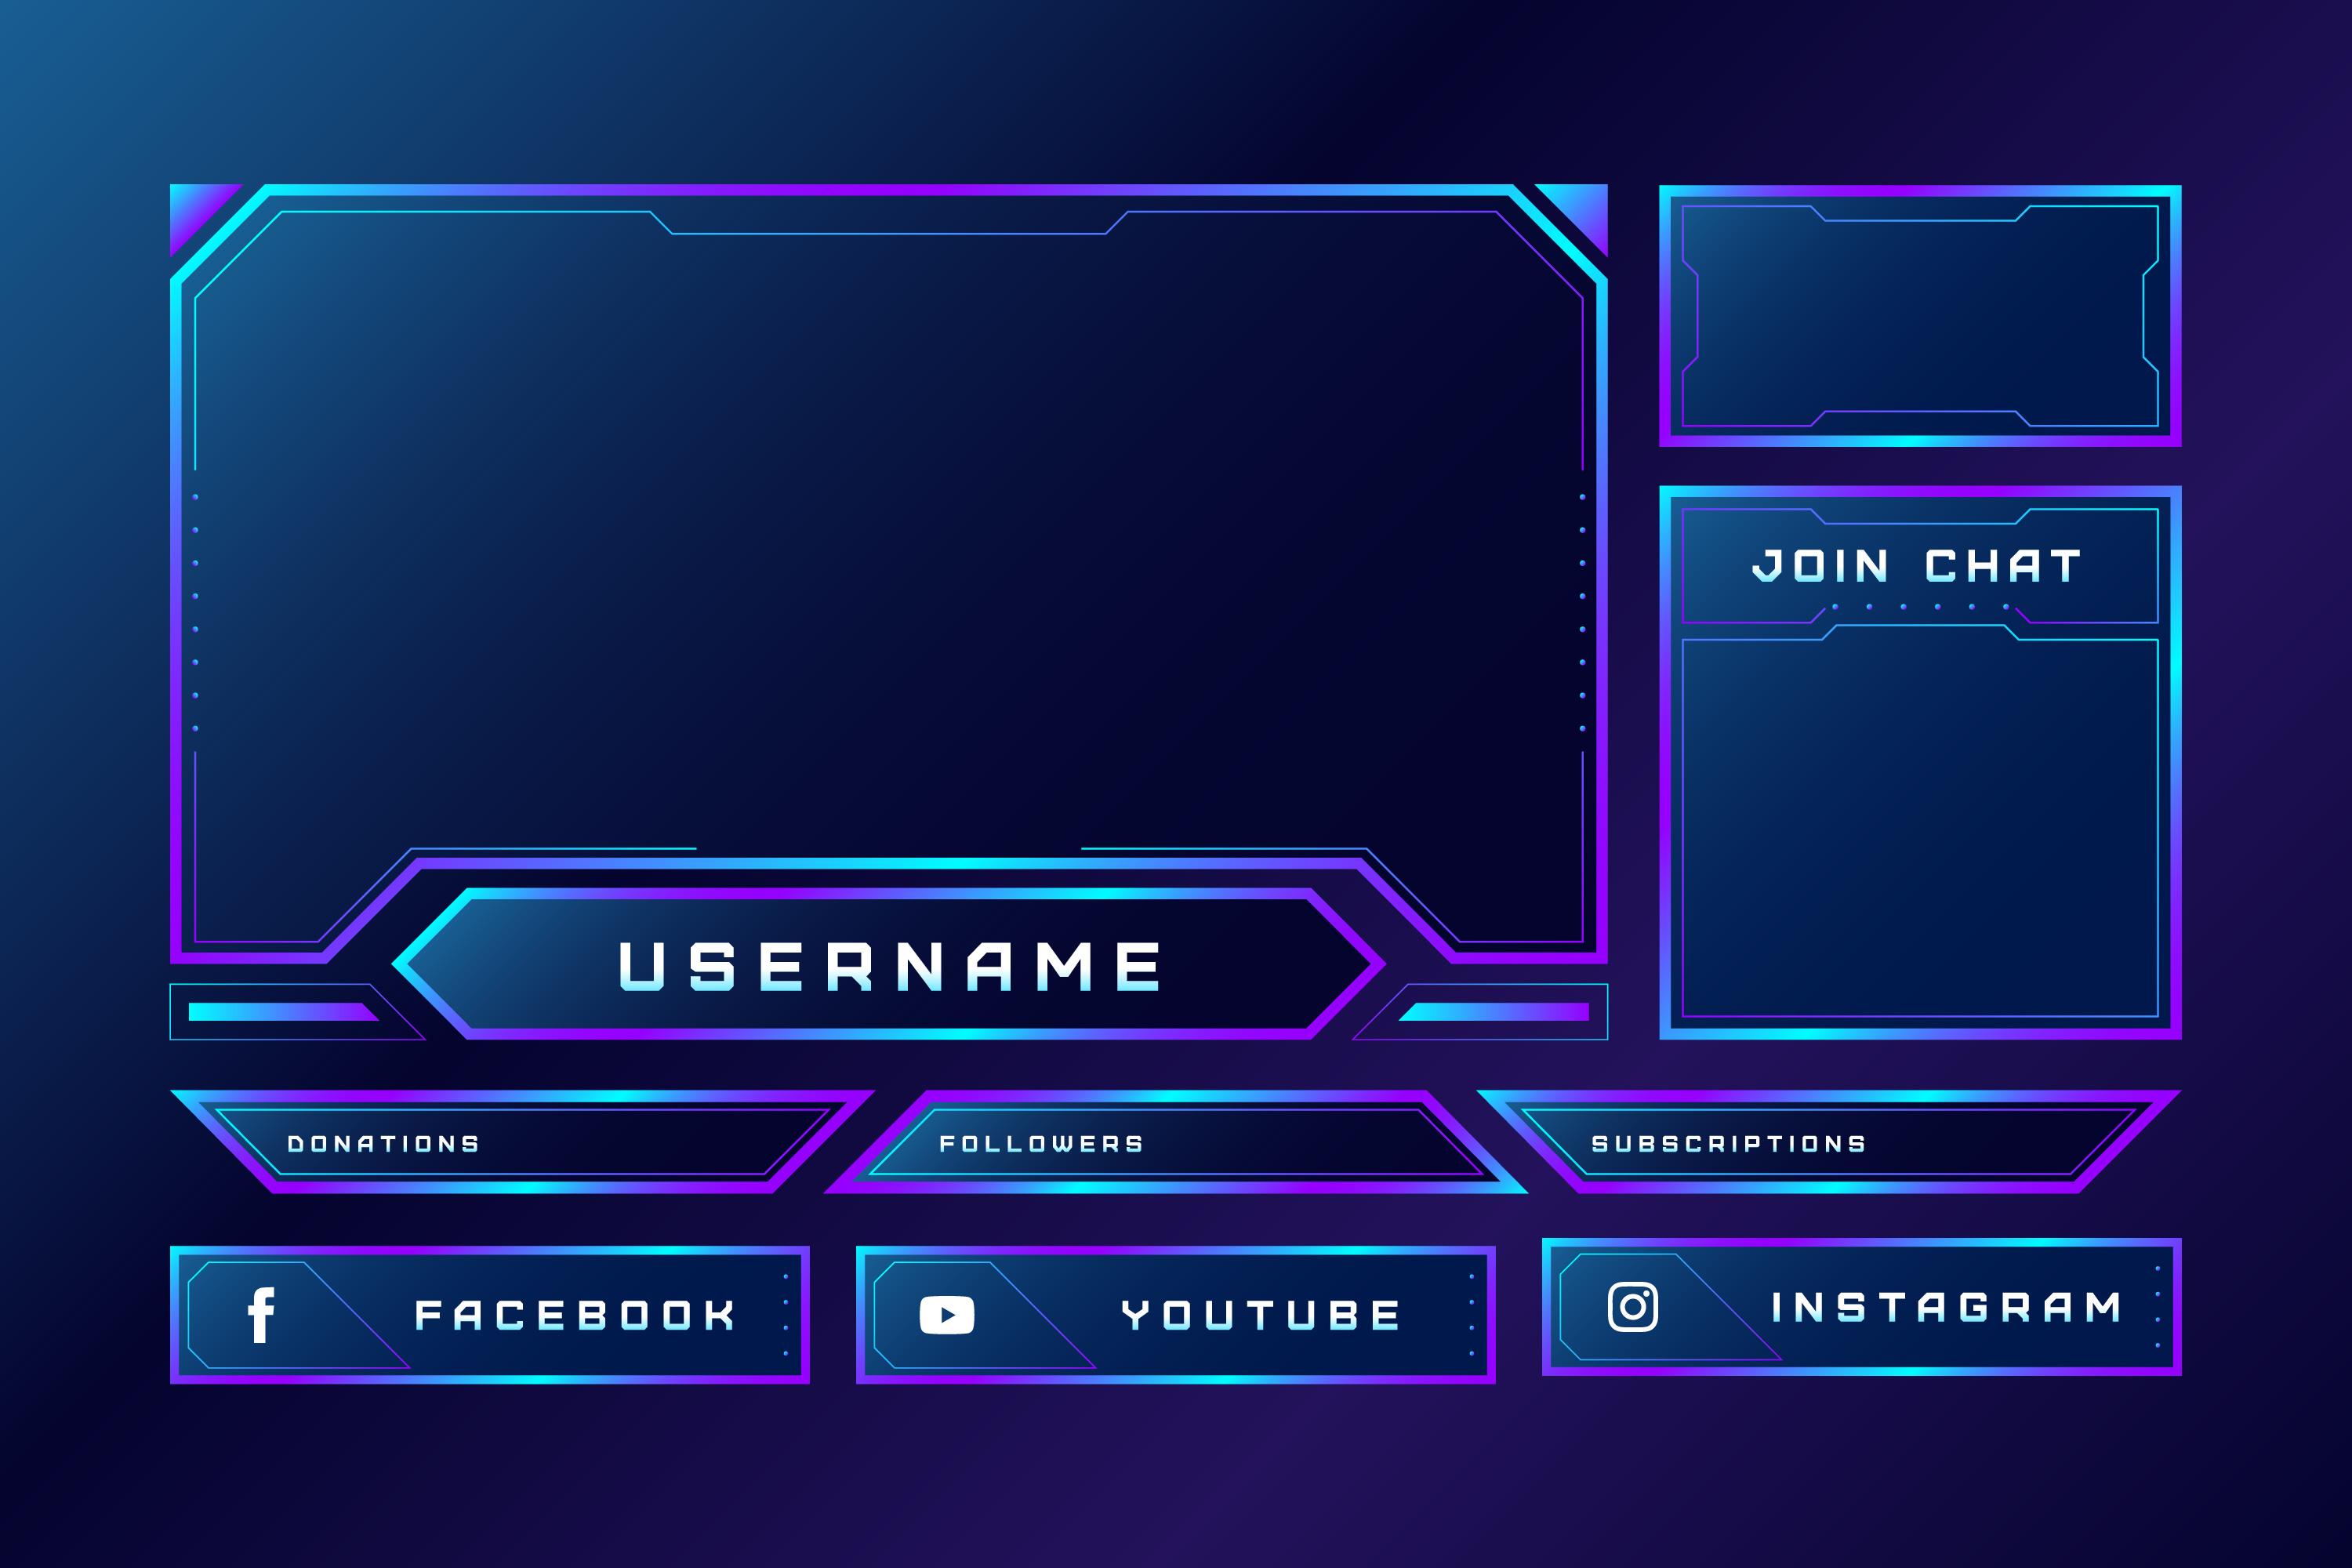 overlay for twitch stream